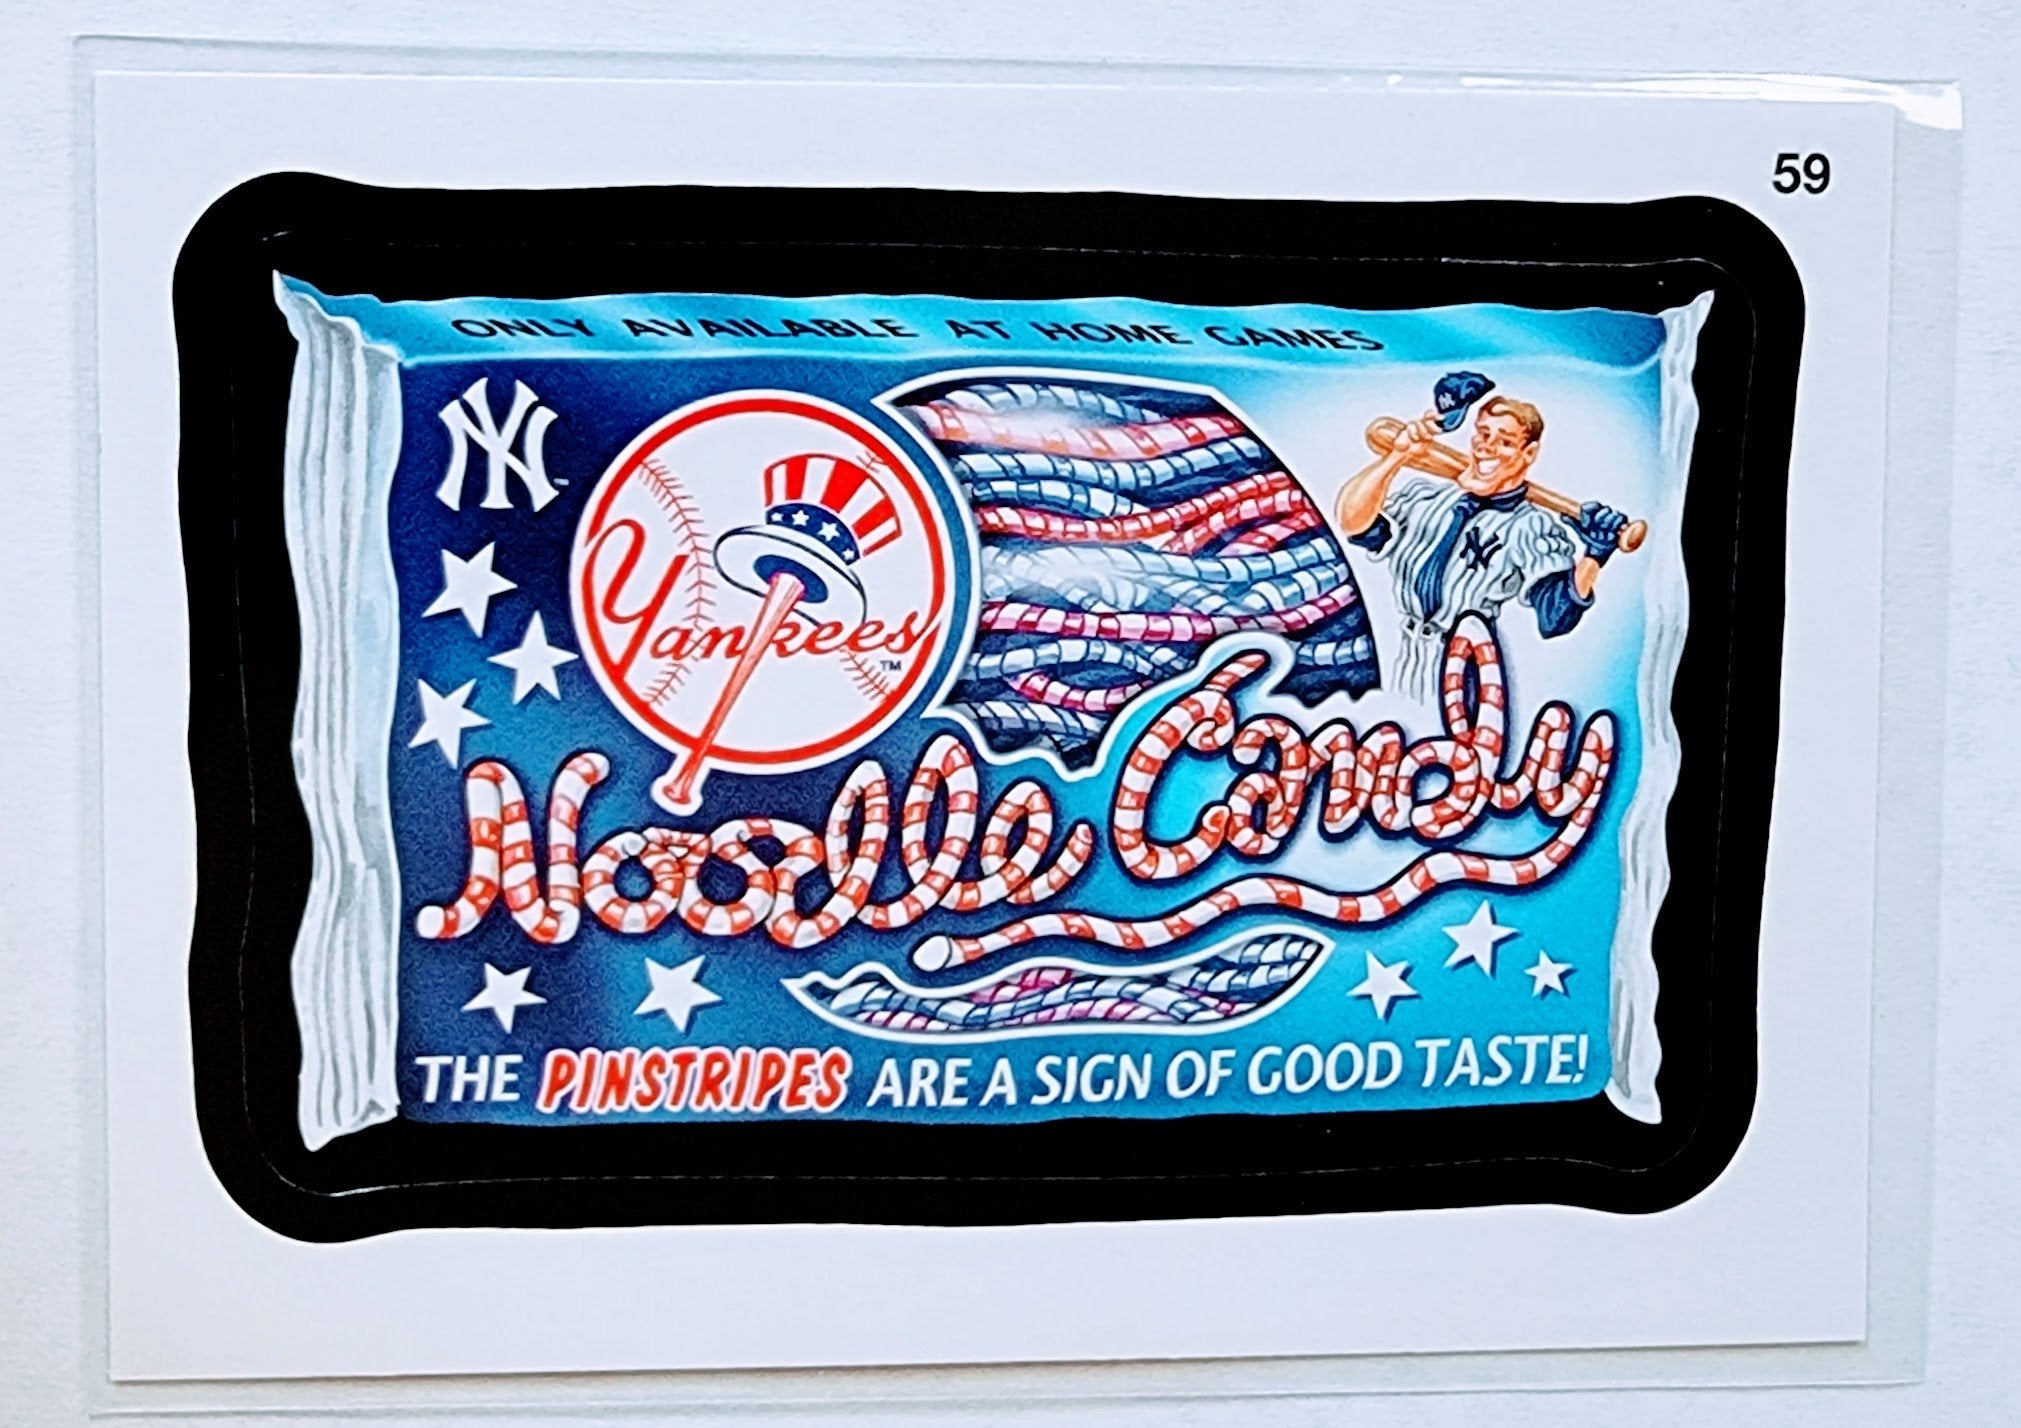 2016 Topps MLB Baseball Wacky Packages New York Yankees Yankee Doodle Candy Sticker Trading Card MCSC1 simple Xclusive Collectibles   